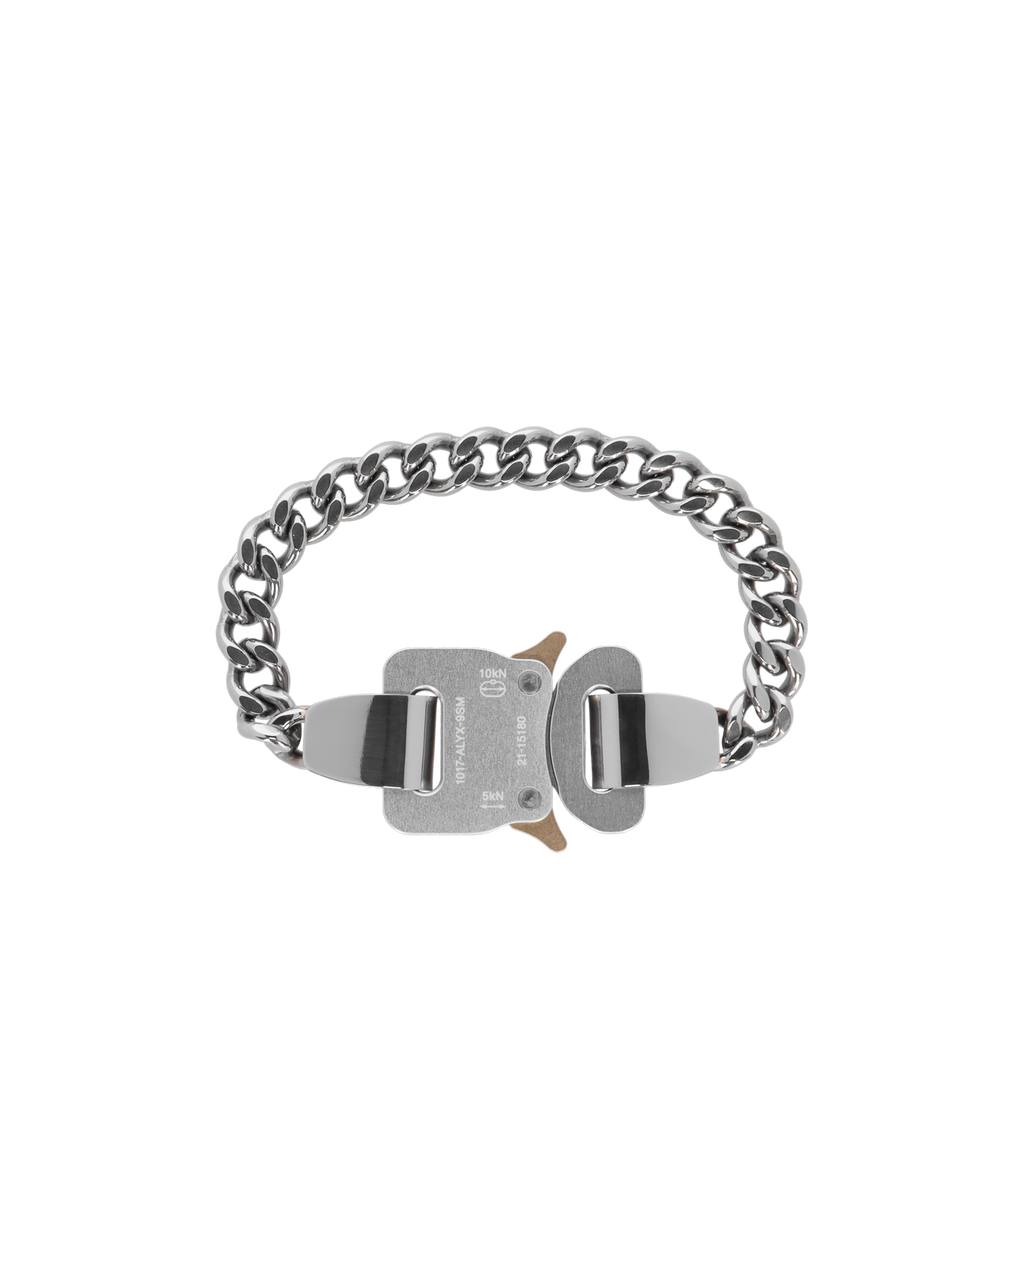 2021SS Alyx Track Bracelet High Version Aluminium Alloy For Men, Women, And  Couples Jewelry Bangles 2022 Q0717235r From Igbvb, $32.79 | DHgate.Com